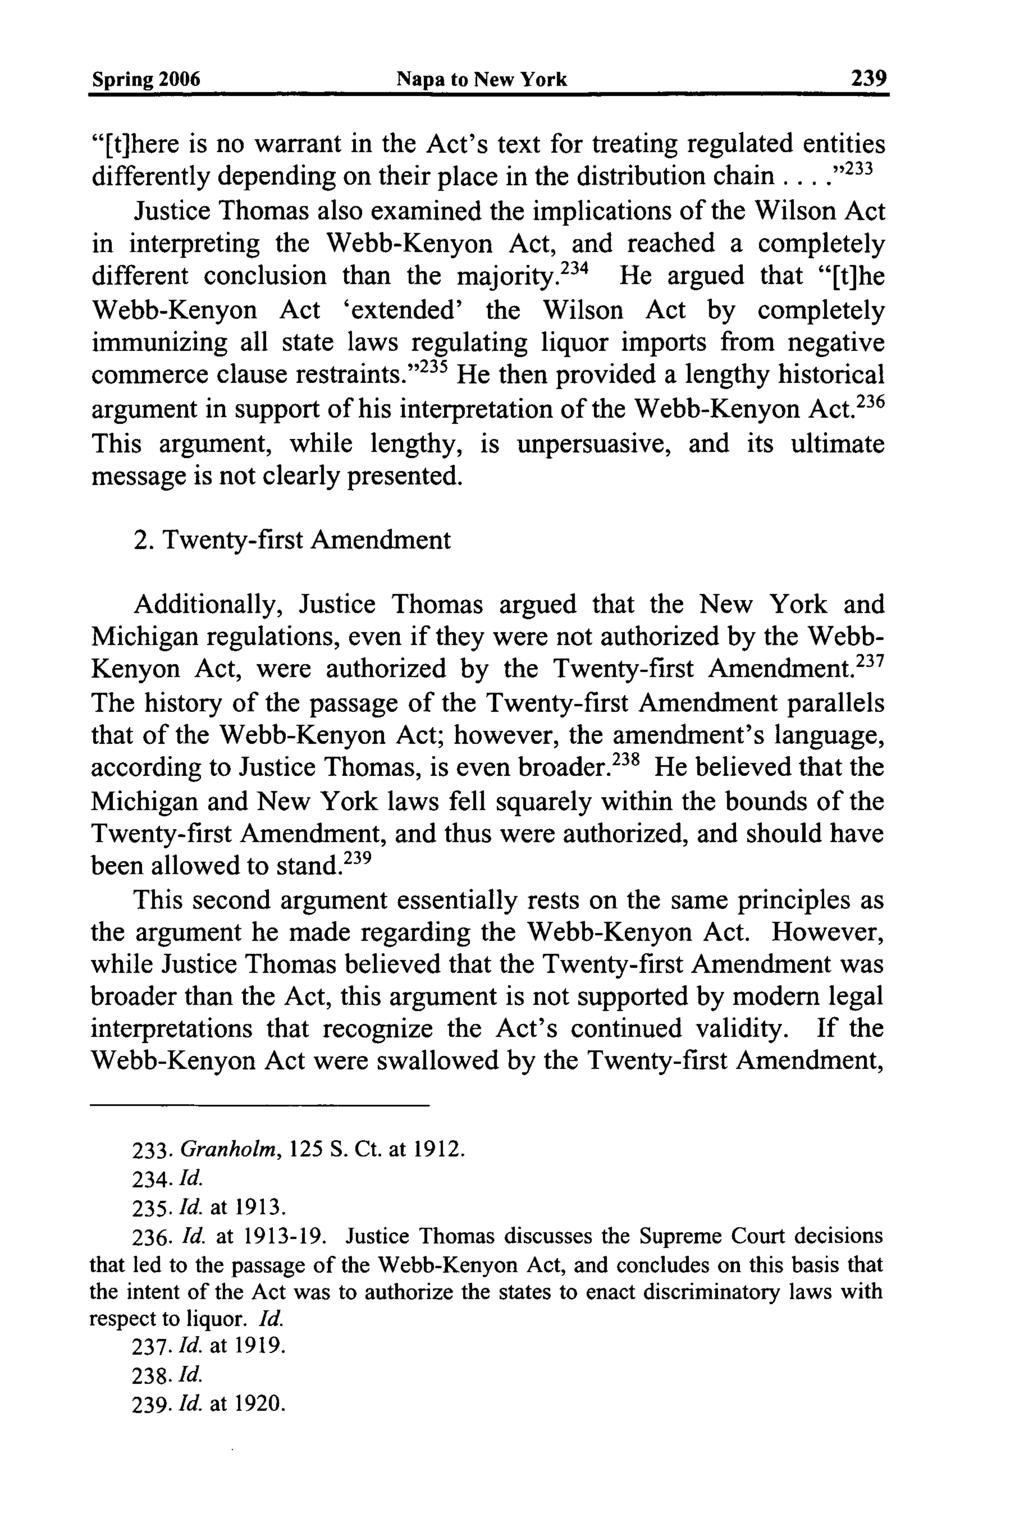 Spring 2006 Napa to New York "[t]here is no warrant in the Act's text for treating regulated entities differently depending on their place in the distribution chain.